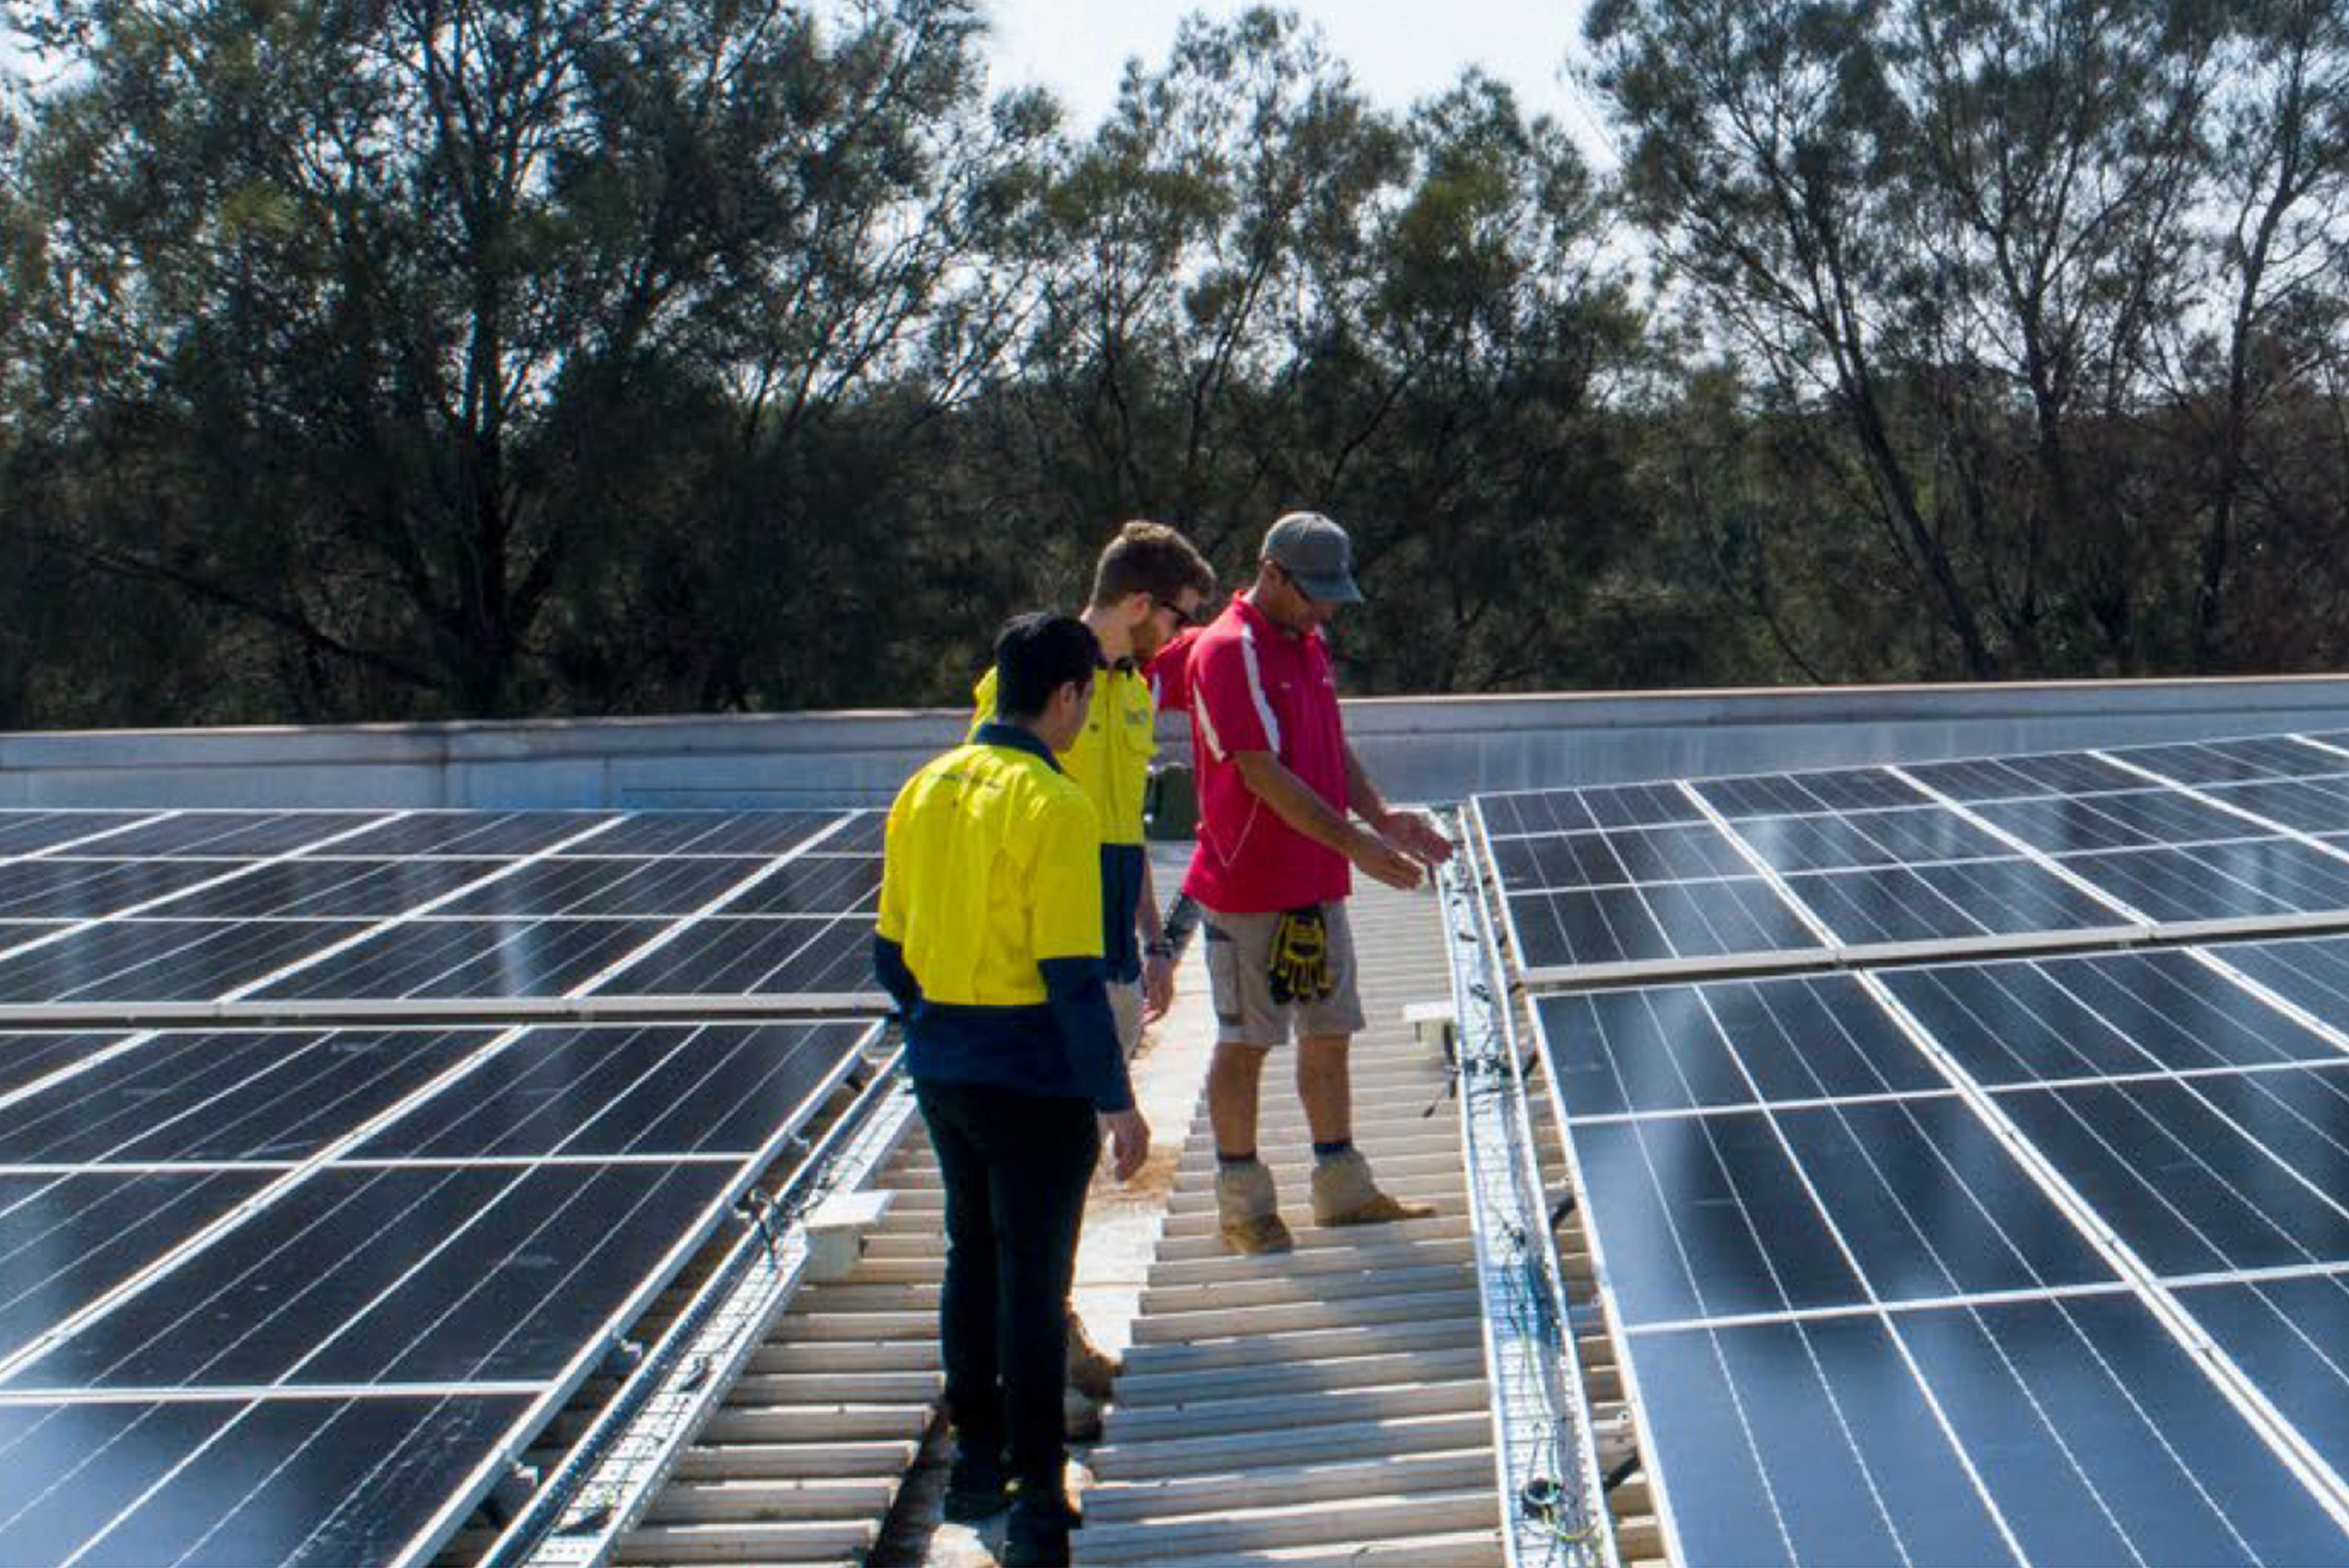 Three solar energy experts inspecting solar panels on a rooftop